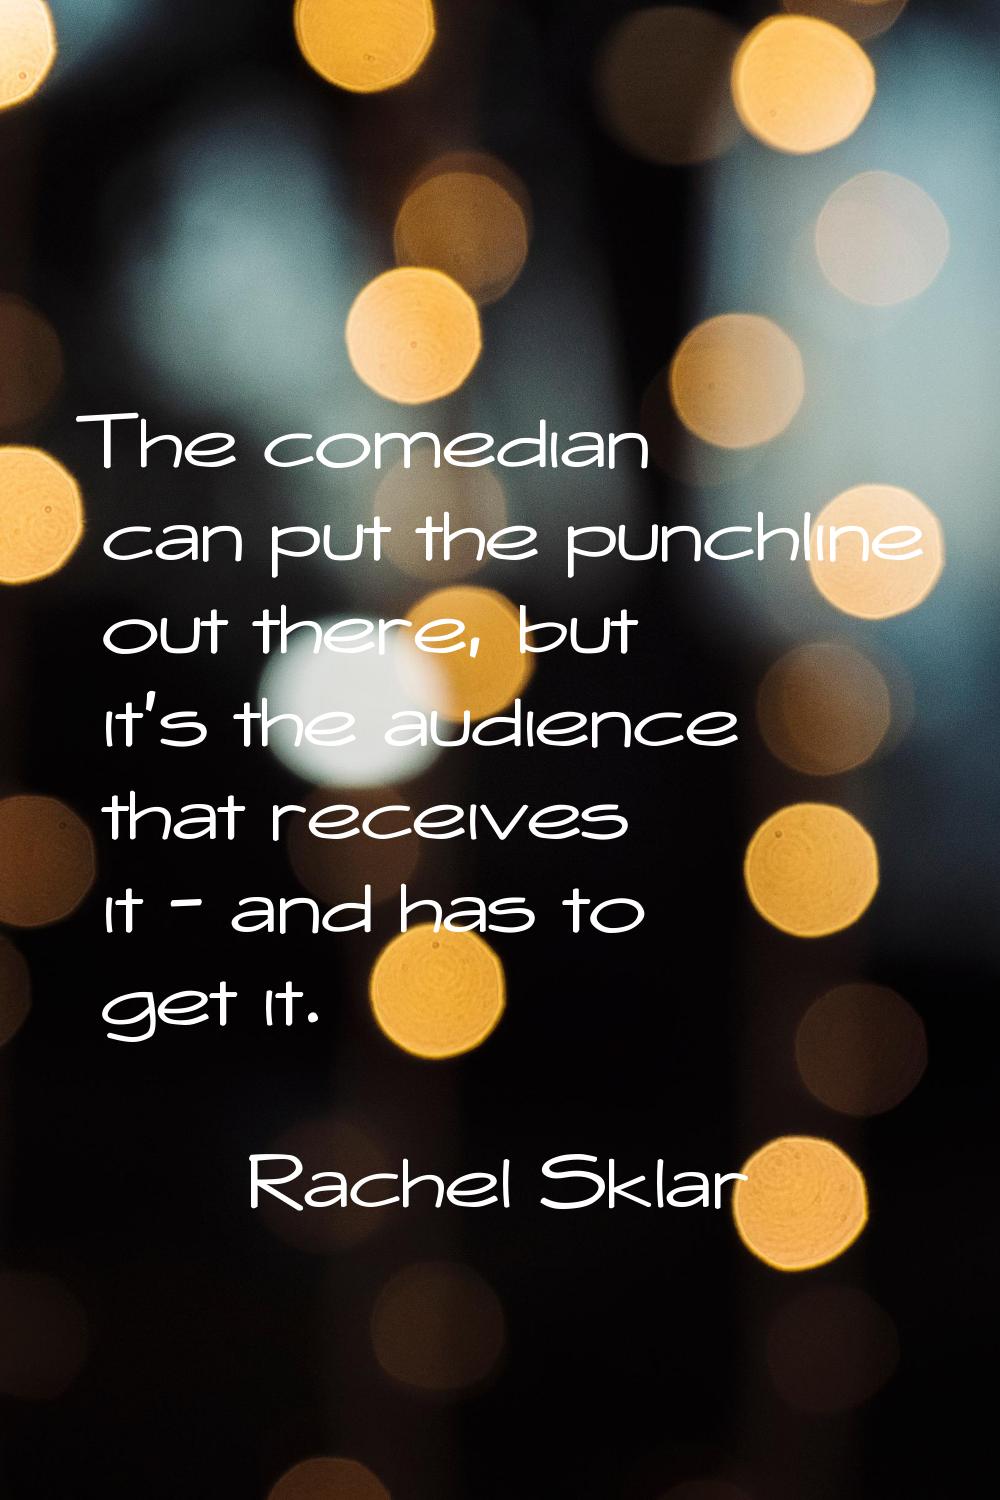 The comedian can put the punchline out there, but it's the audience that receives it - and has to g